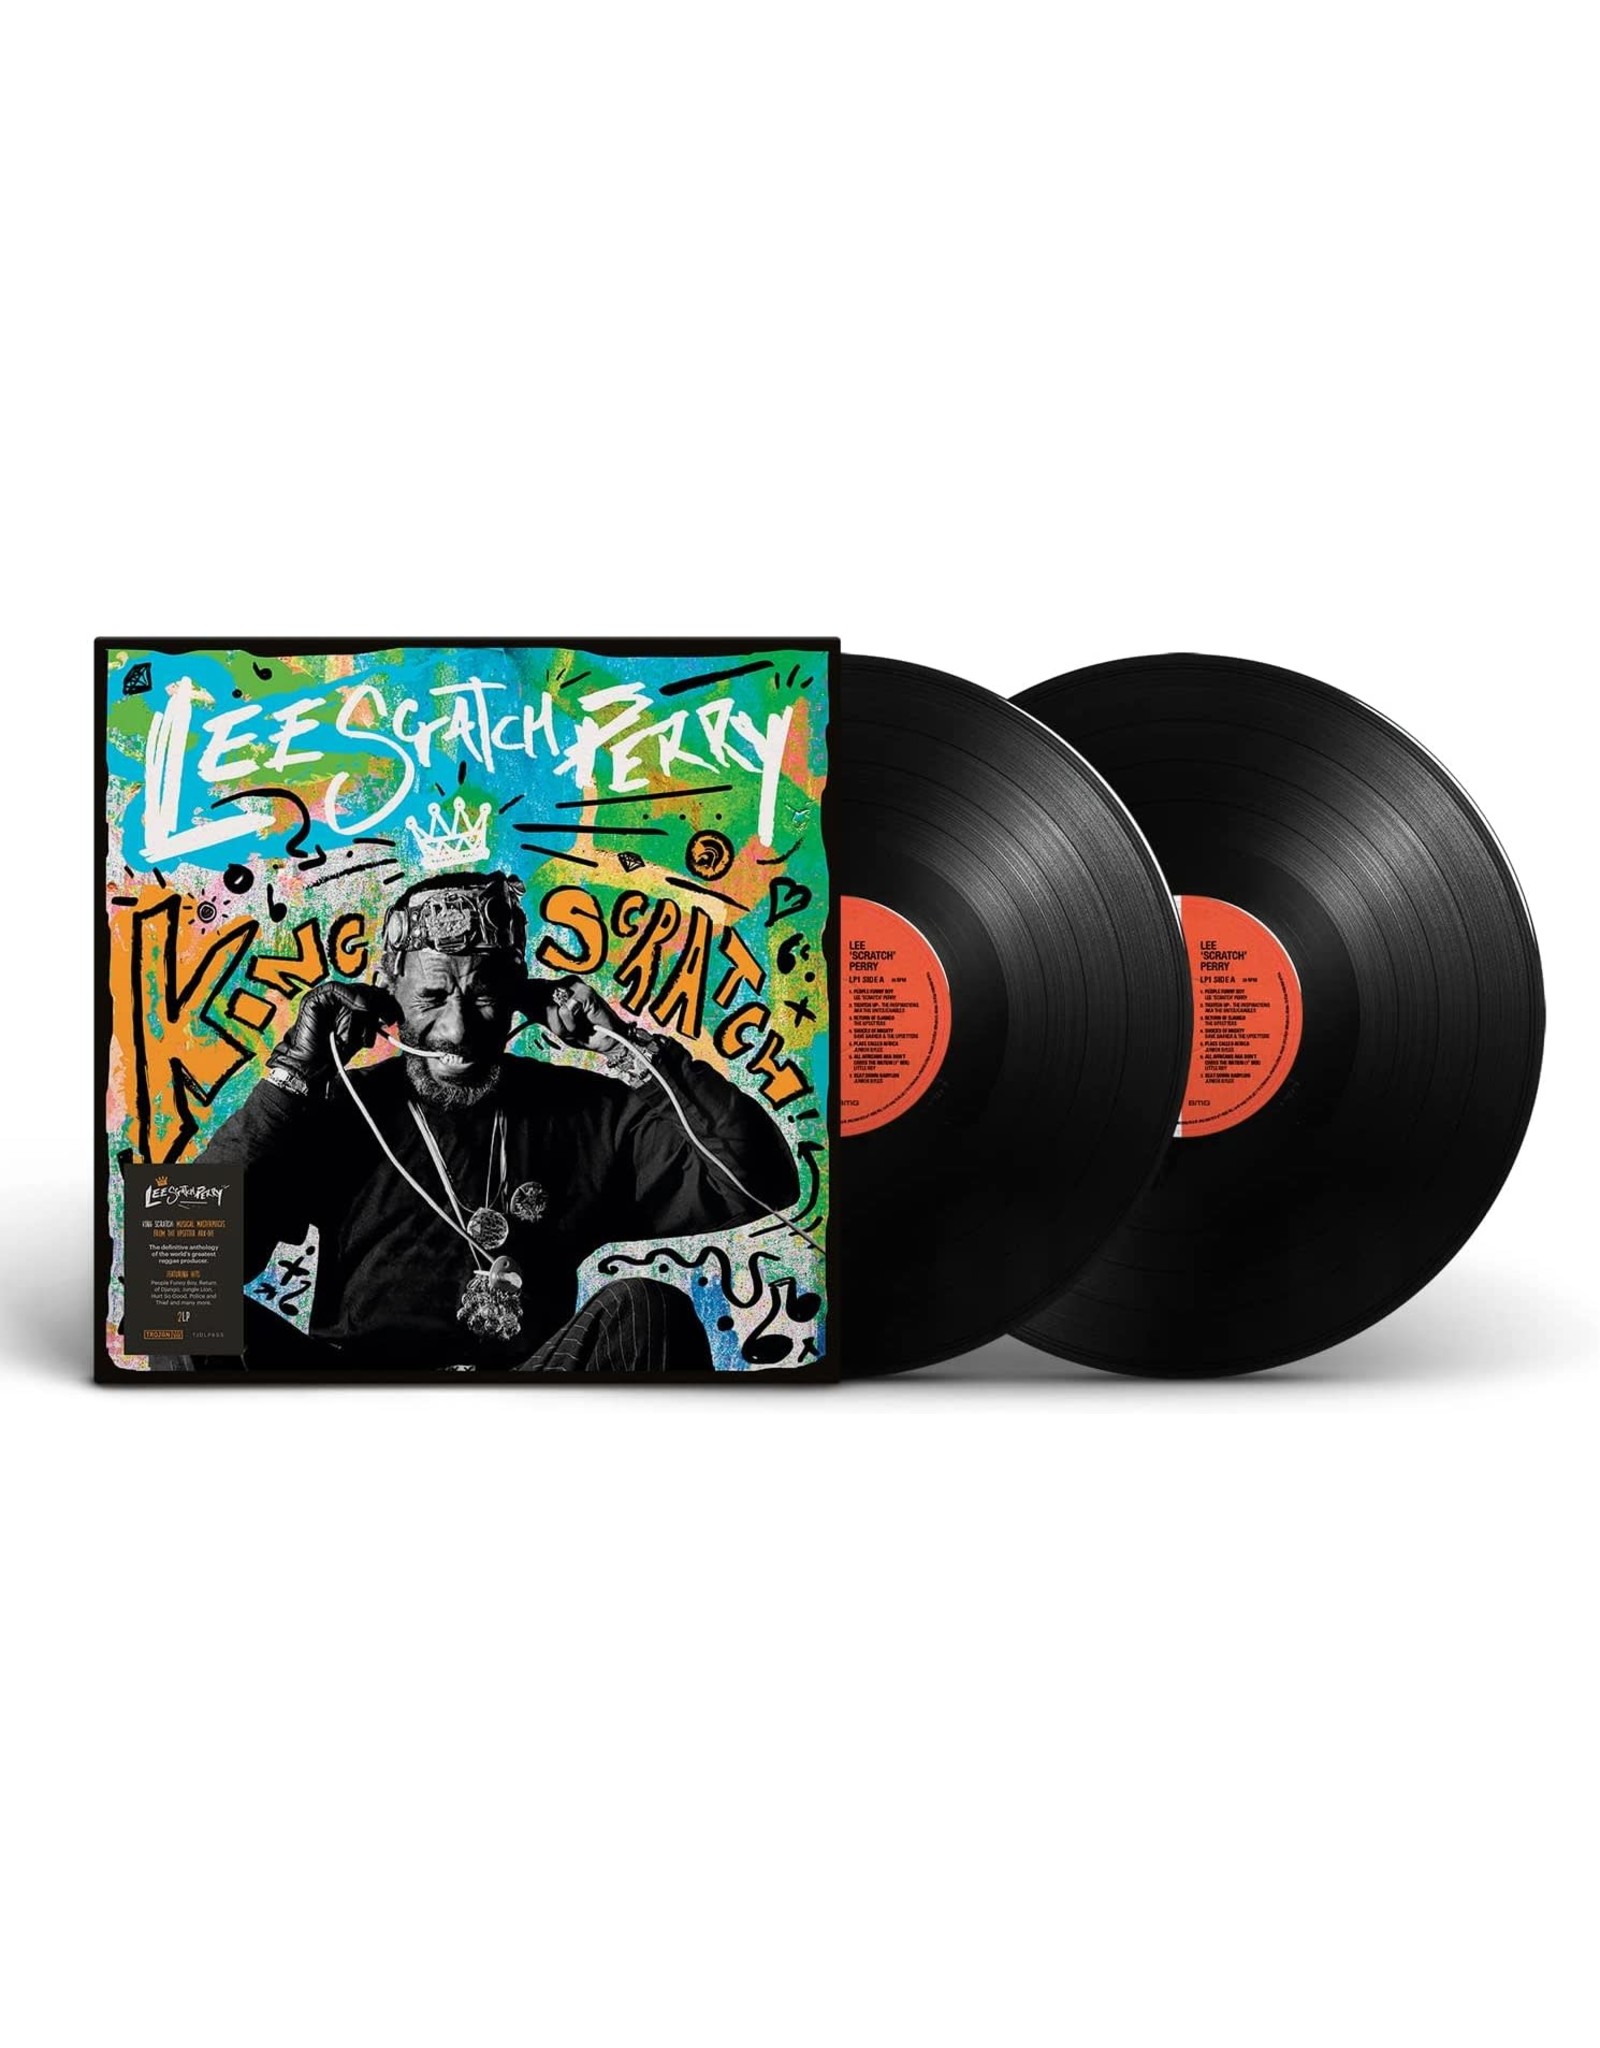 Lee Scratch Perry - King Scratch: Musical Masterpieces From The Upsetter Ark-ive